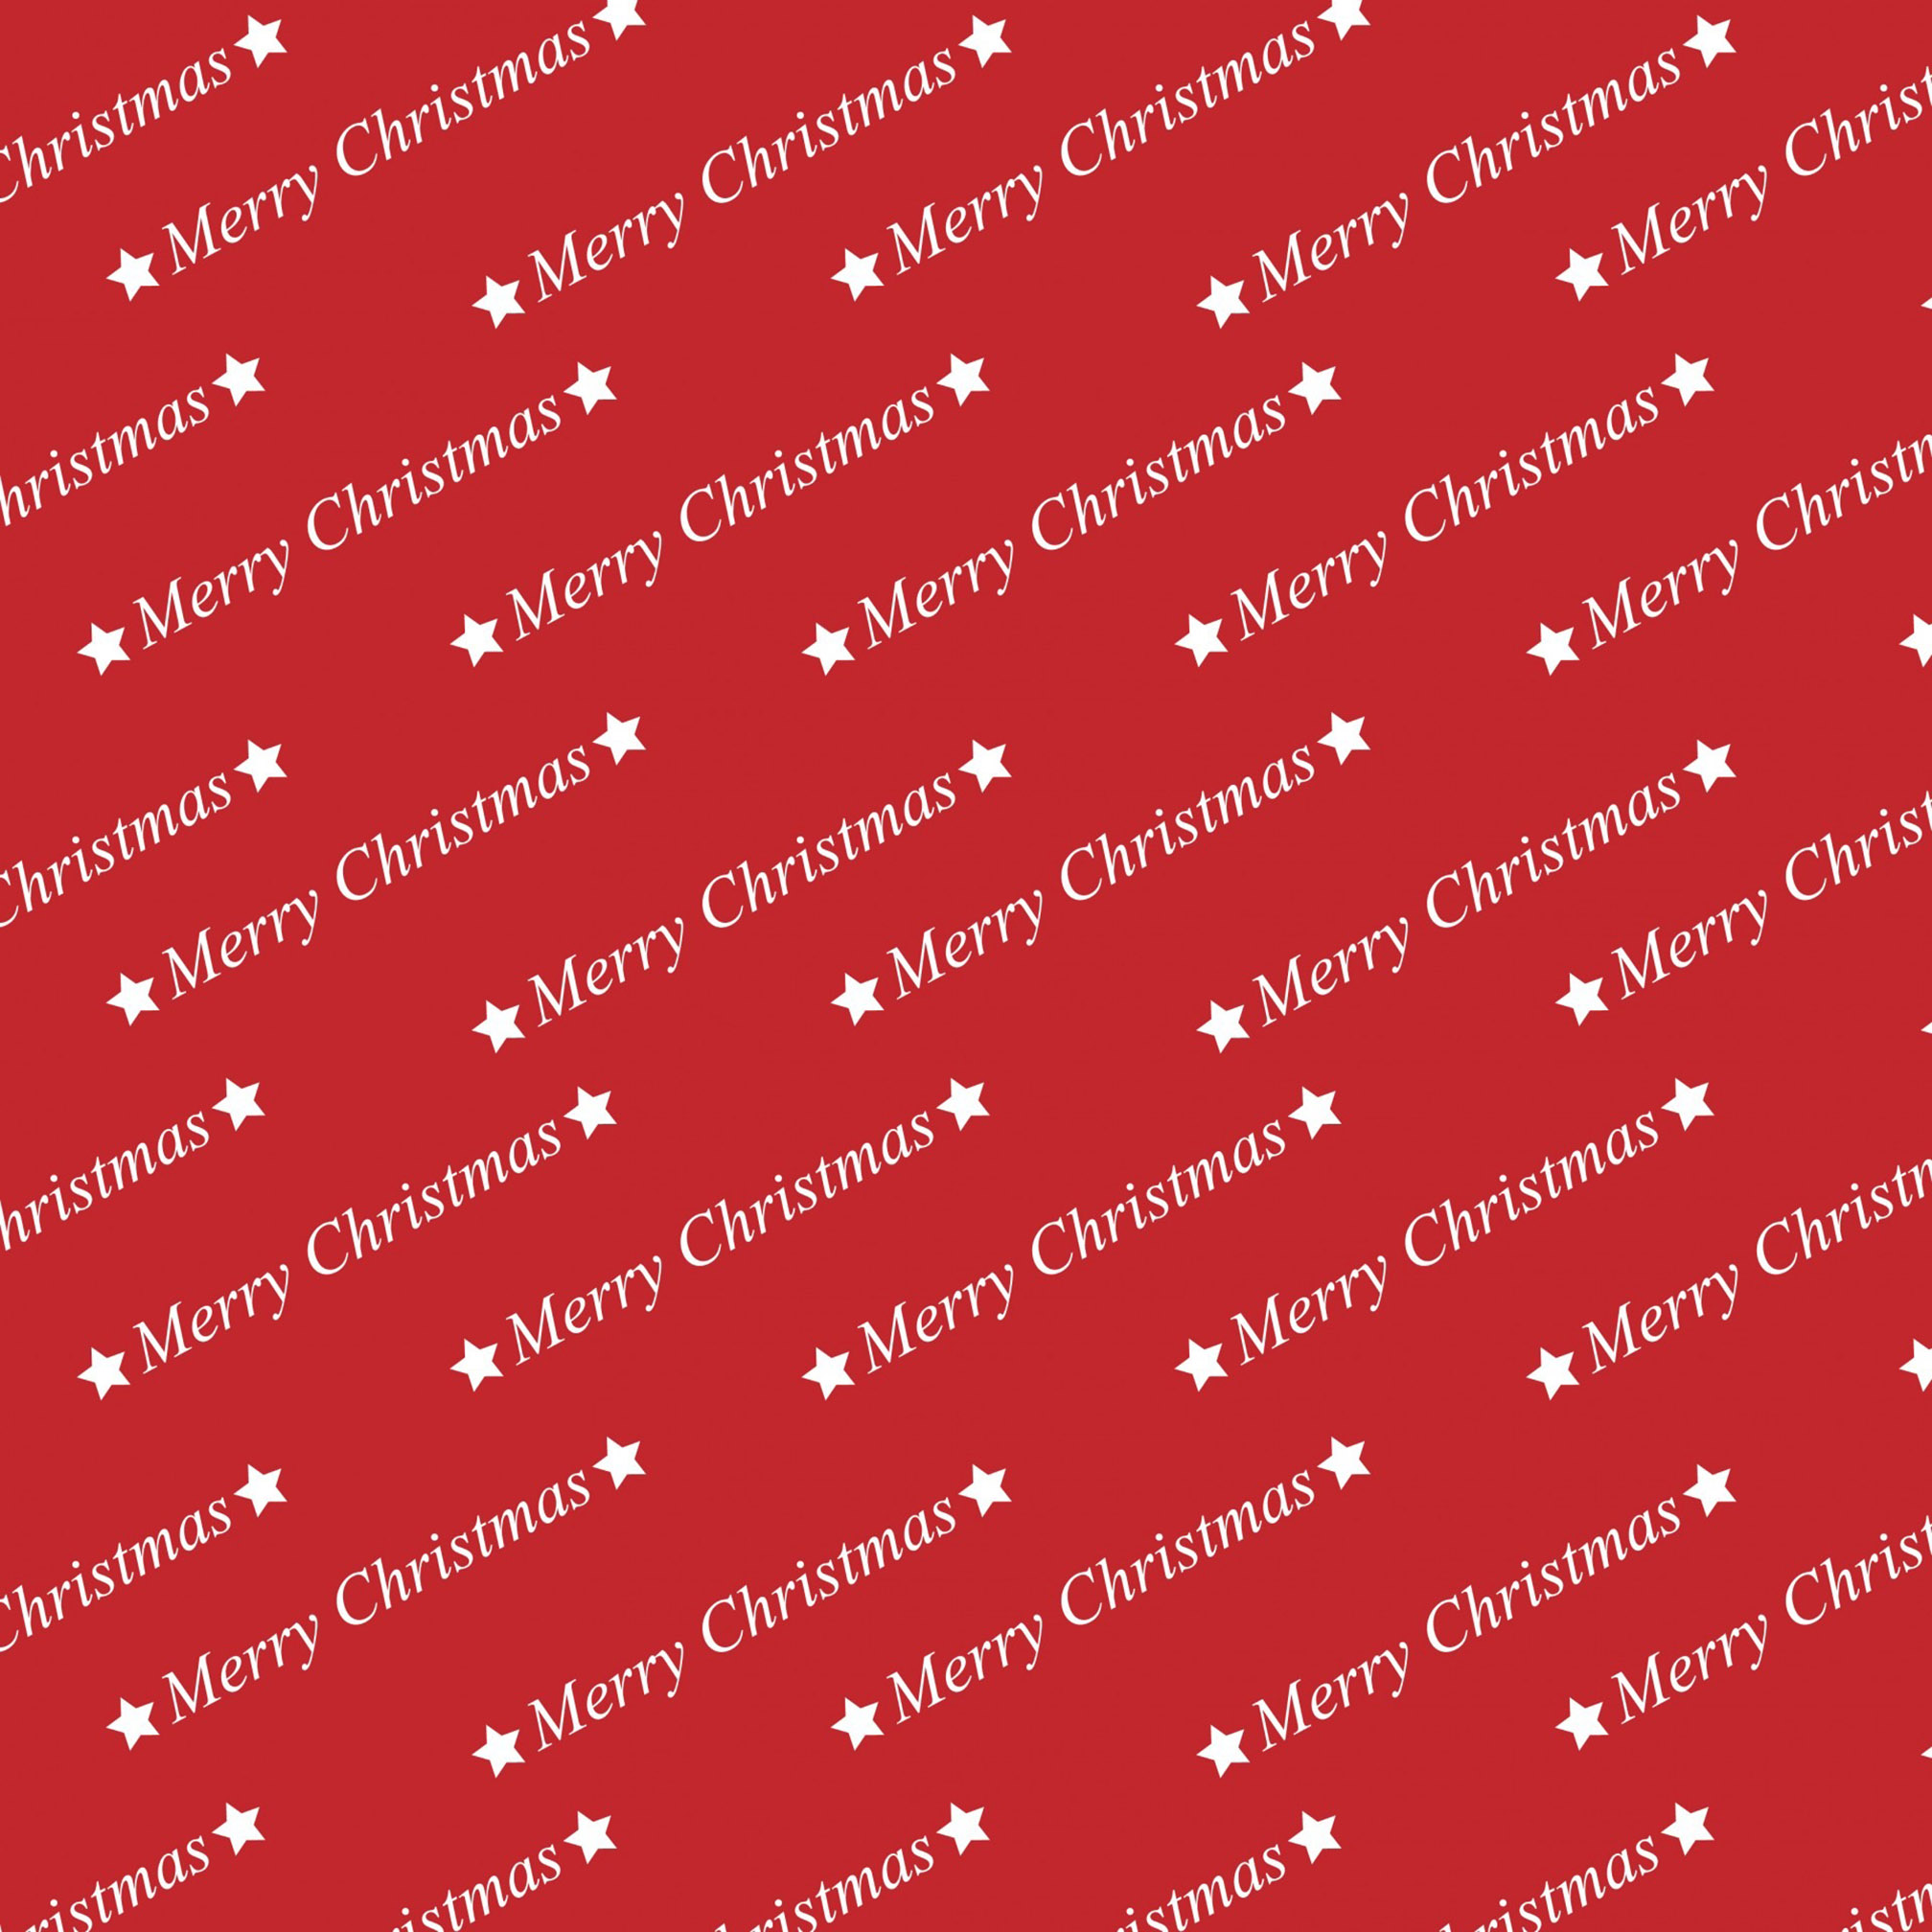 More Christmas Card Wallpaper Or Background Image